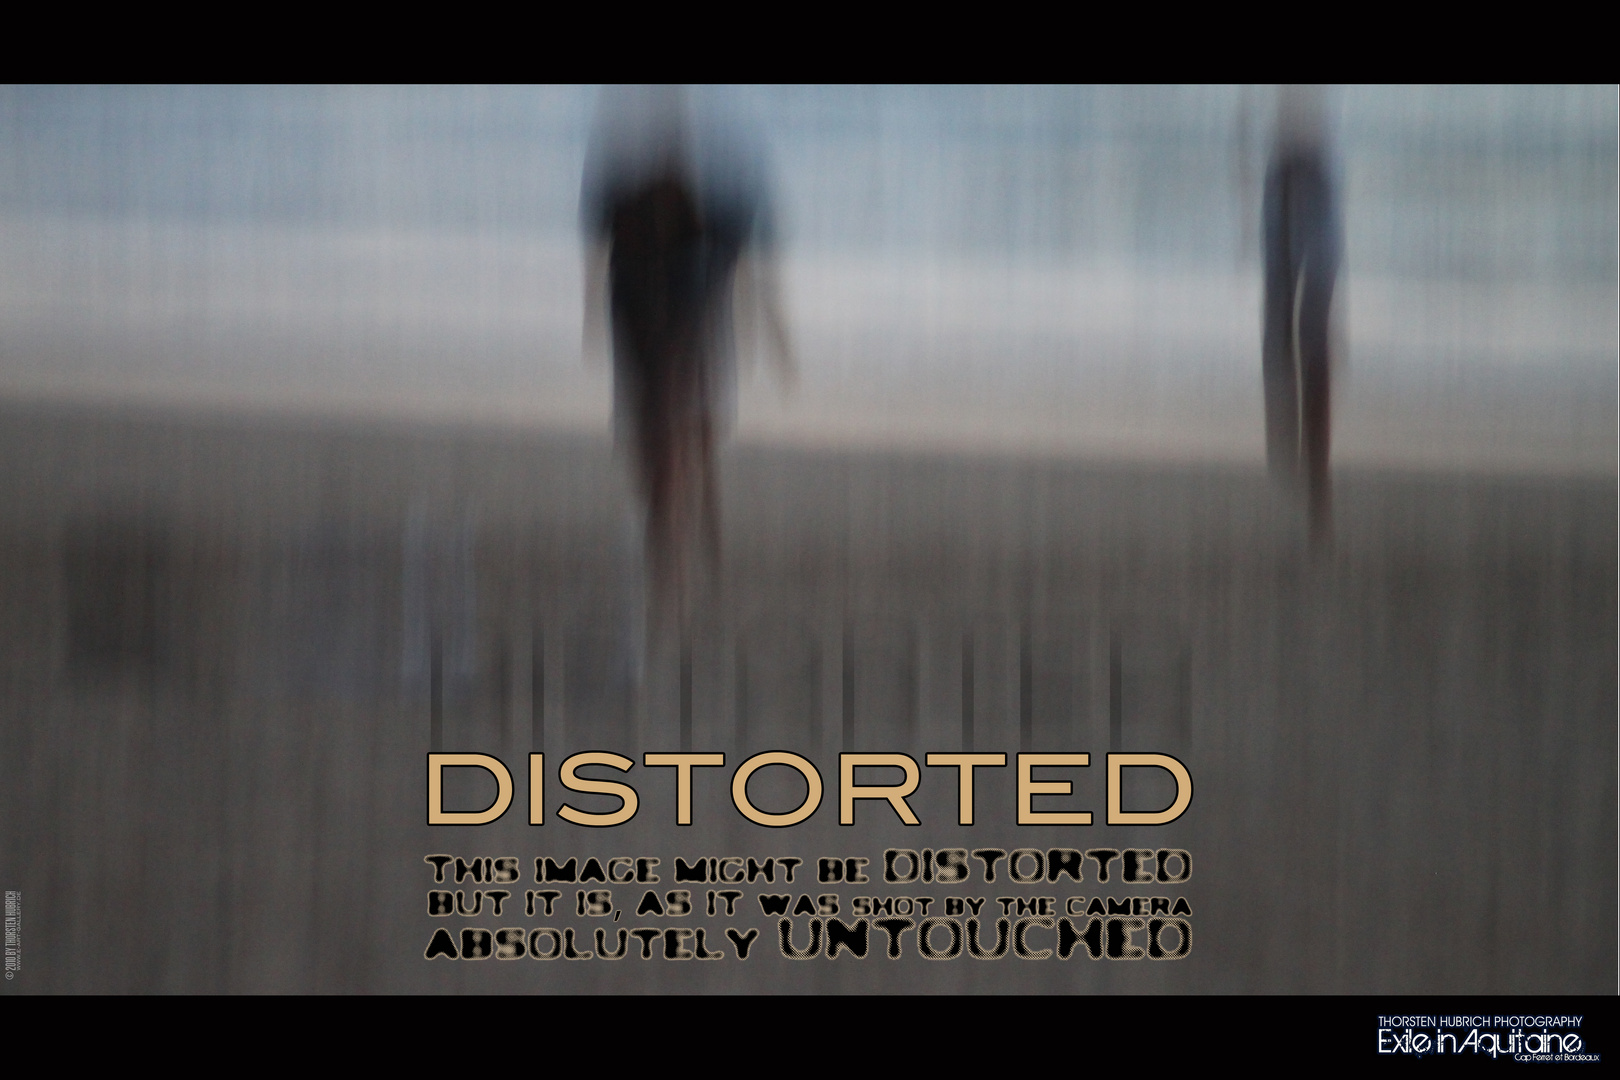 dIstOrteD